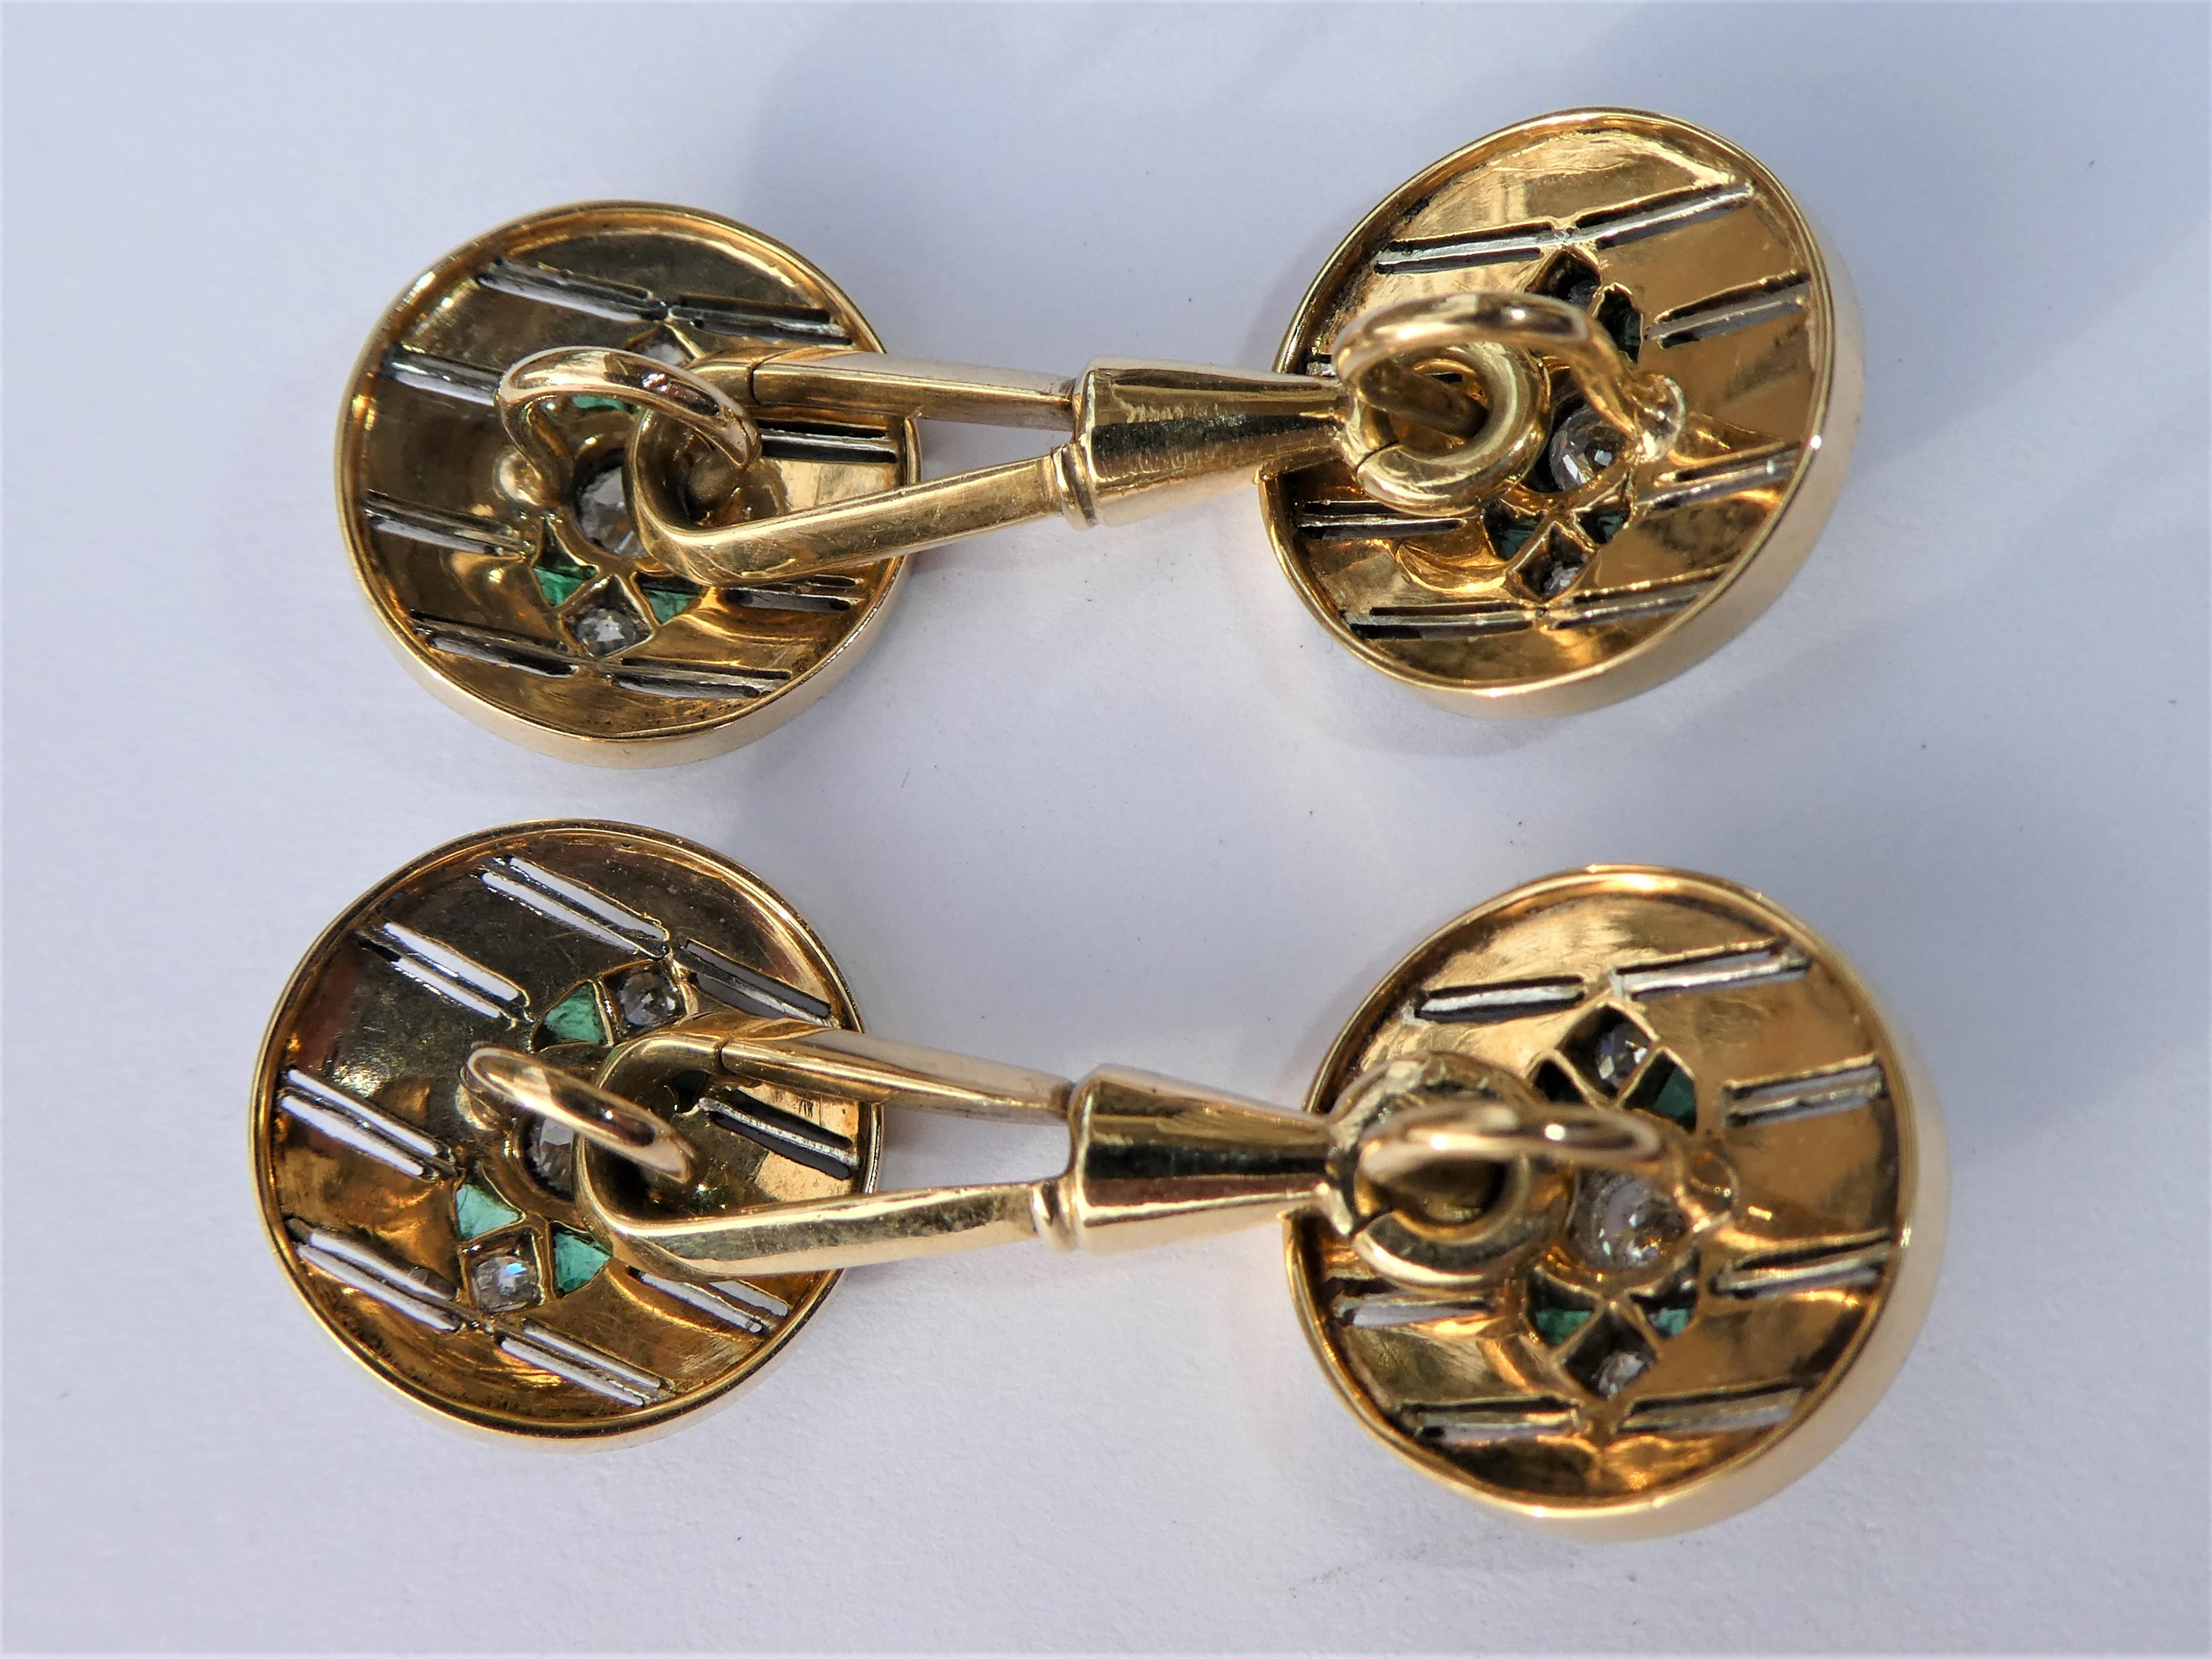 These double-sided cufflinks were crafted in Vienna around 1910. In those days the 